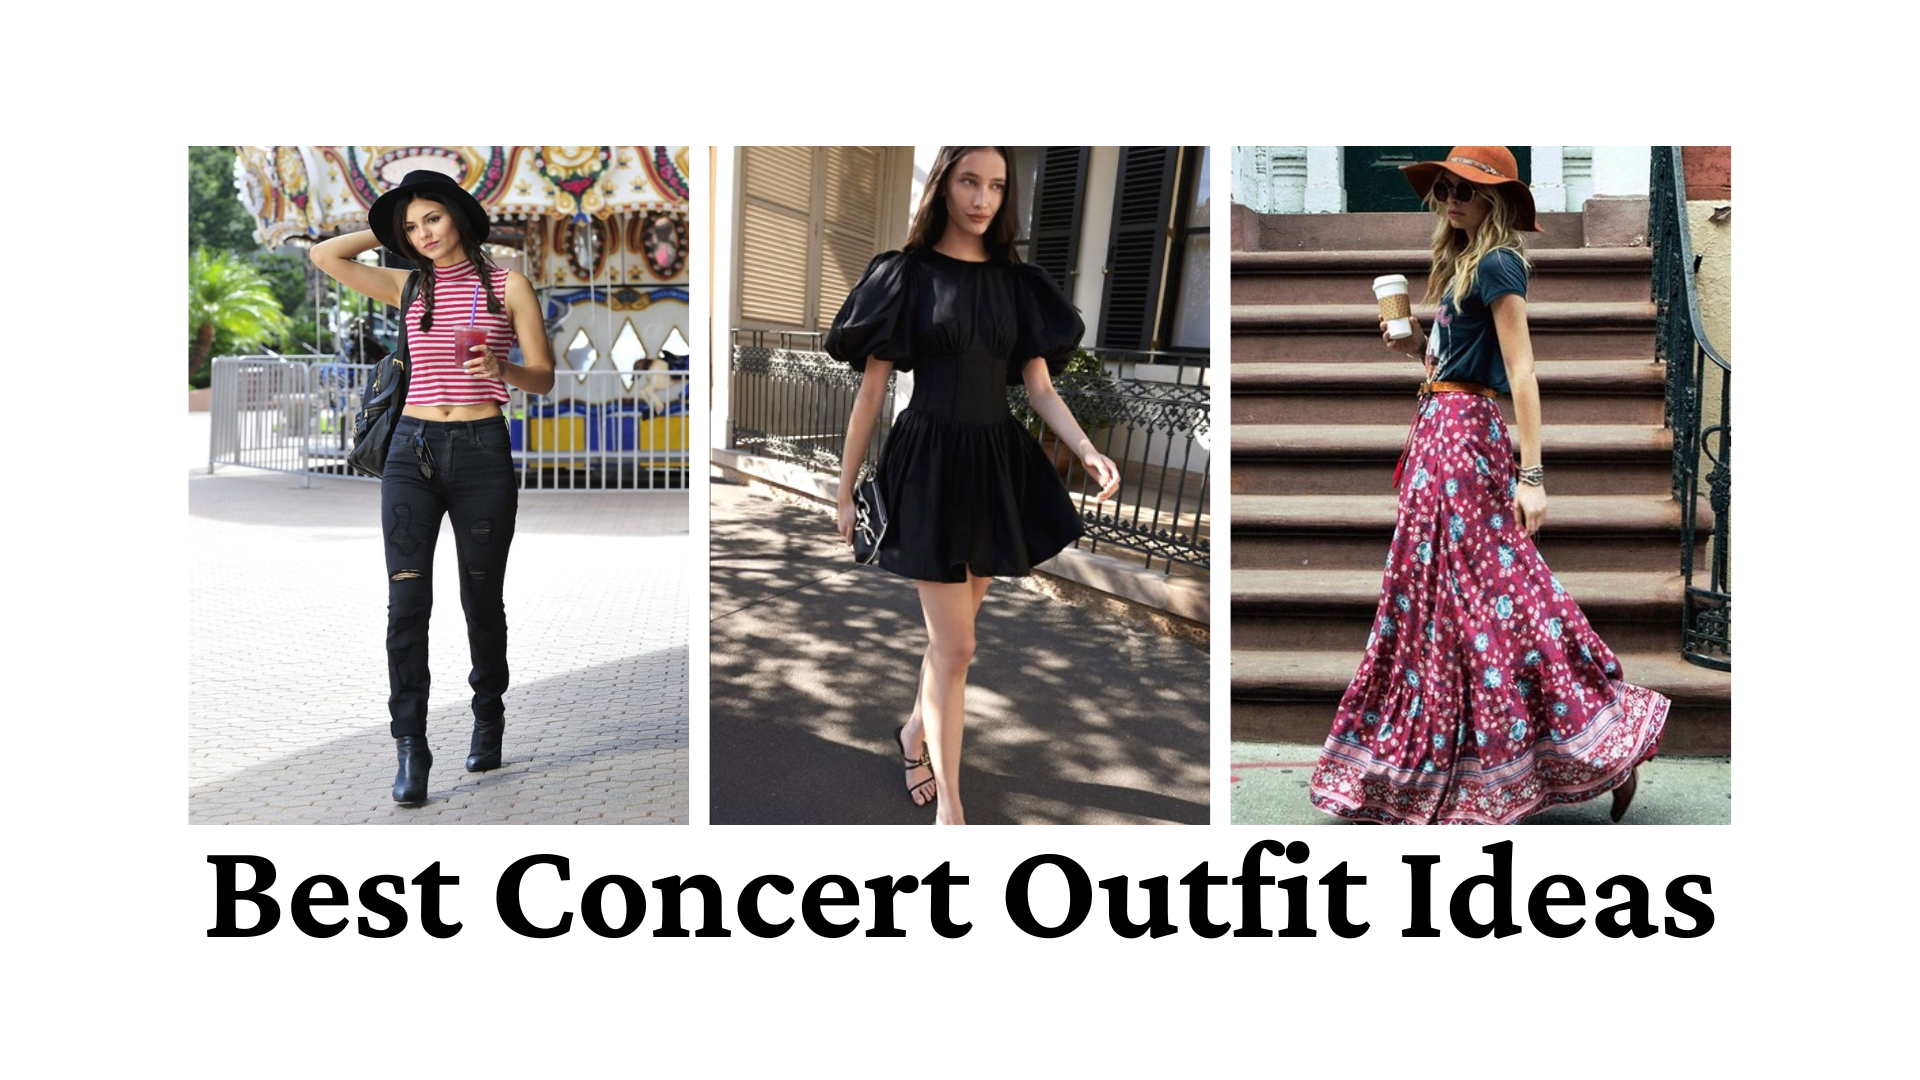 Concert Outfit Ideas2023: What to Wear to a Concert?